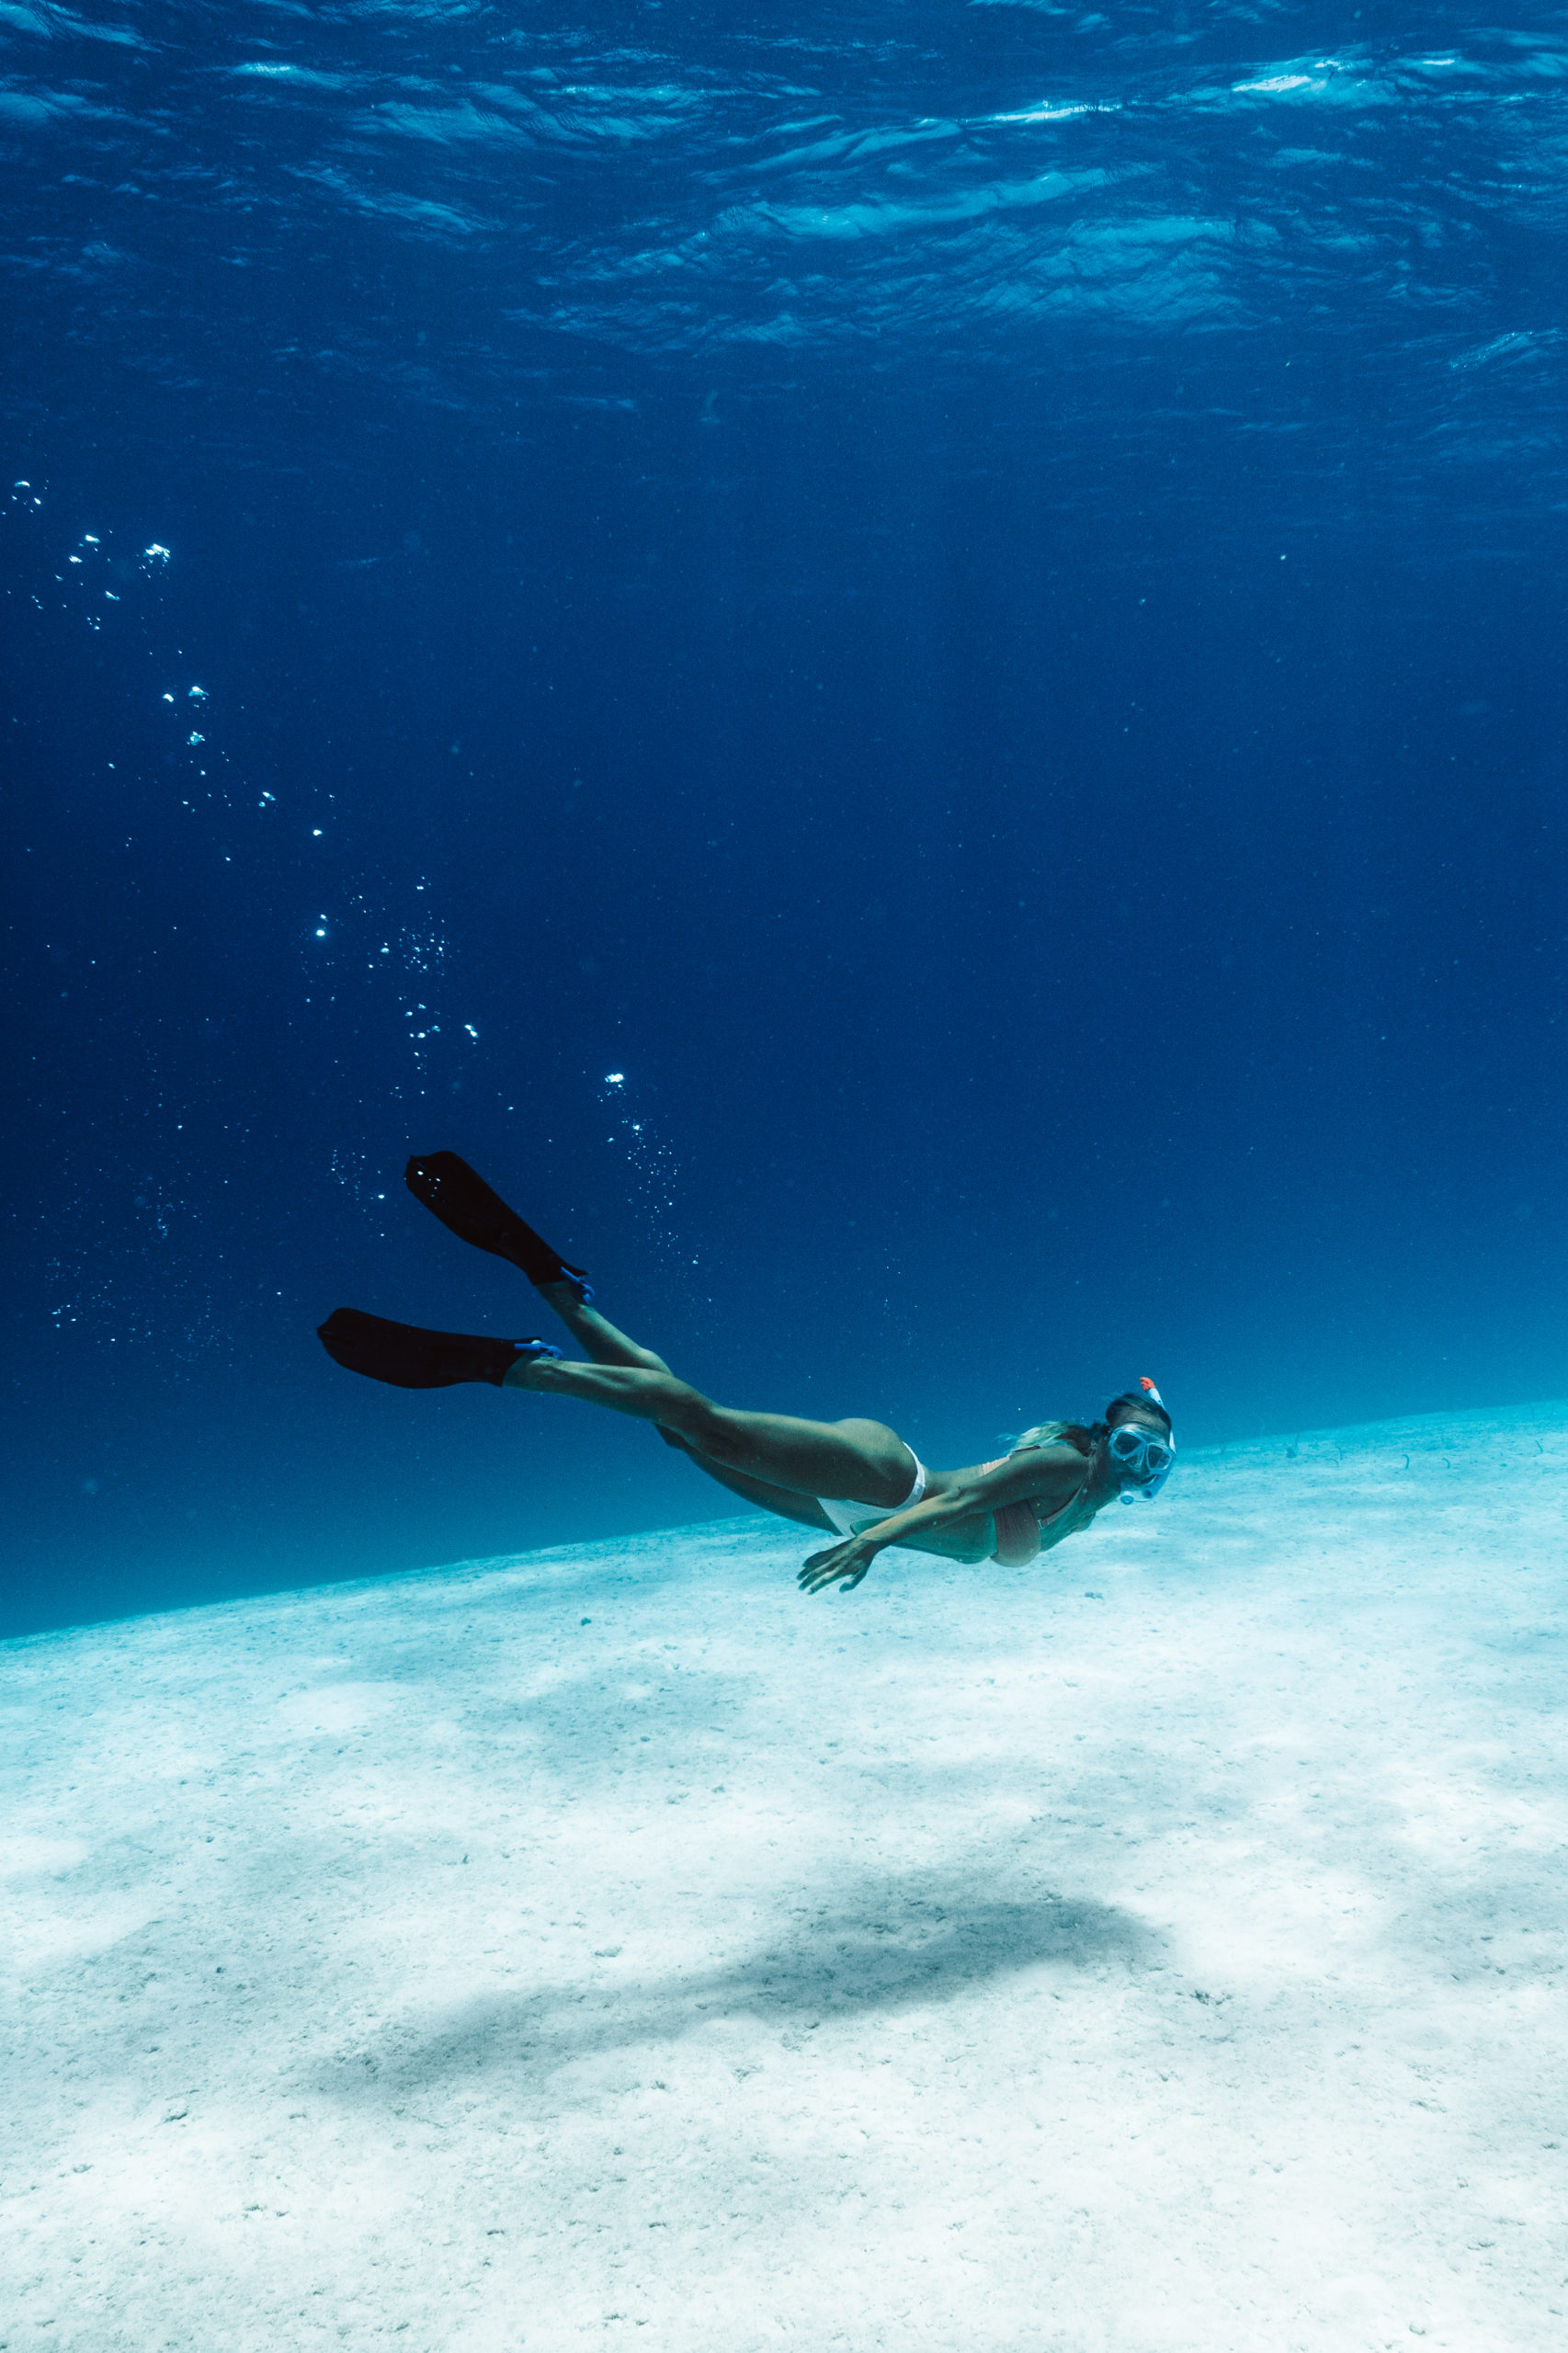 Salty Luxe snorkeling in the clear waters at baglioni maldives